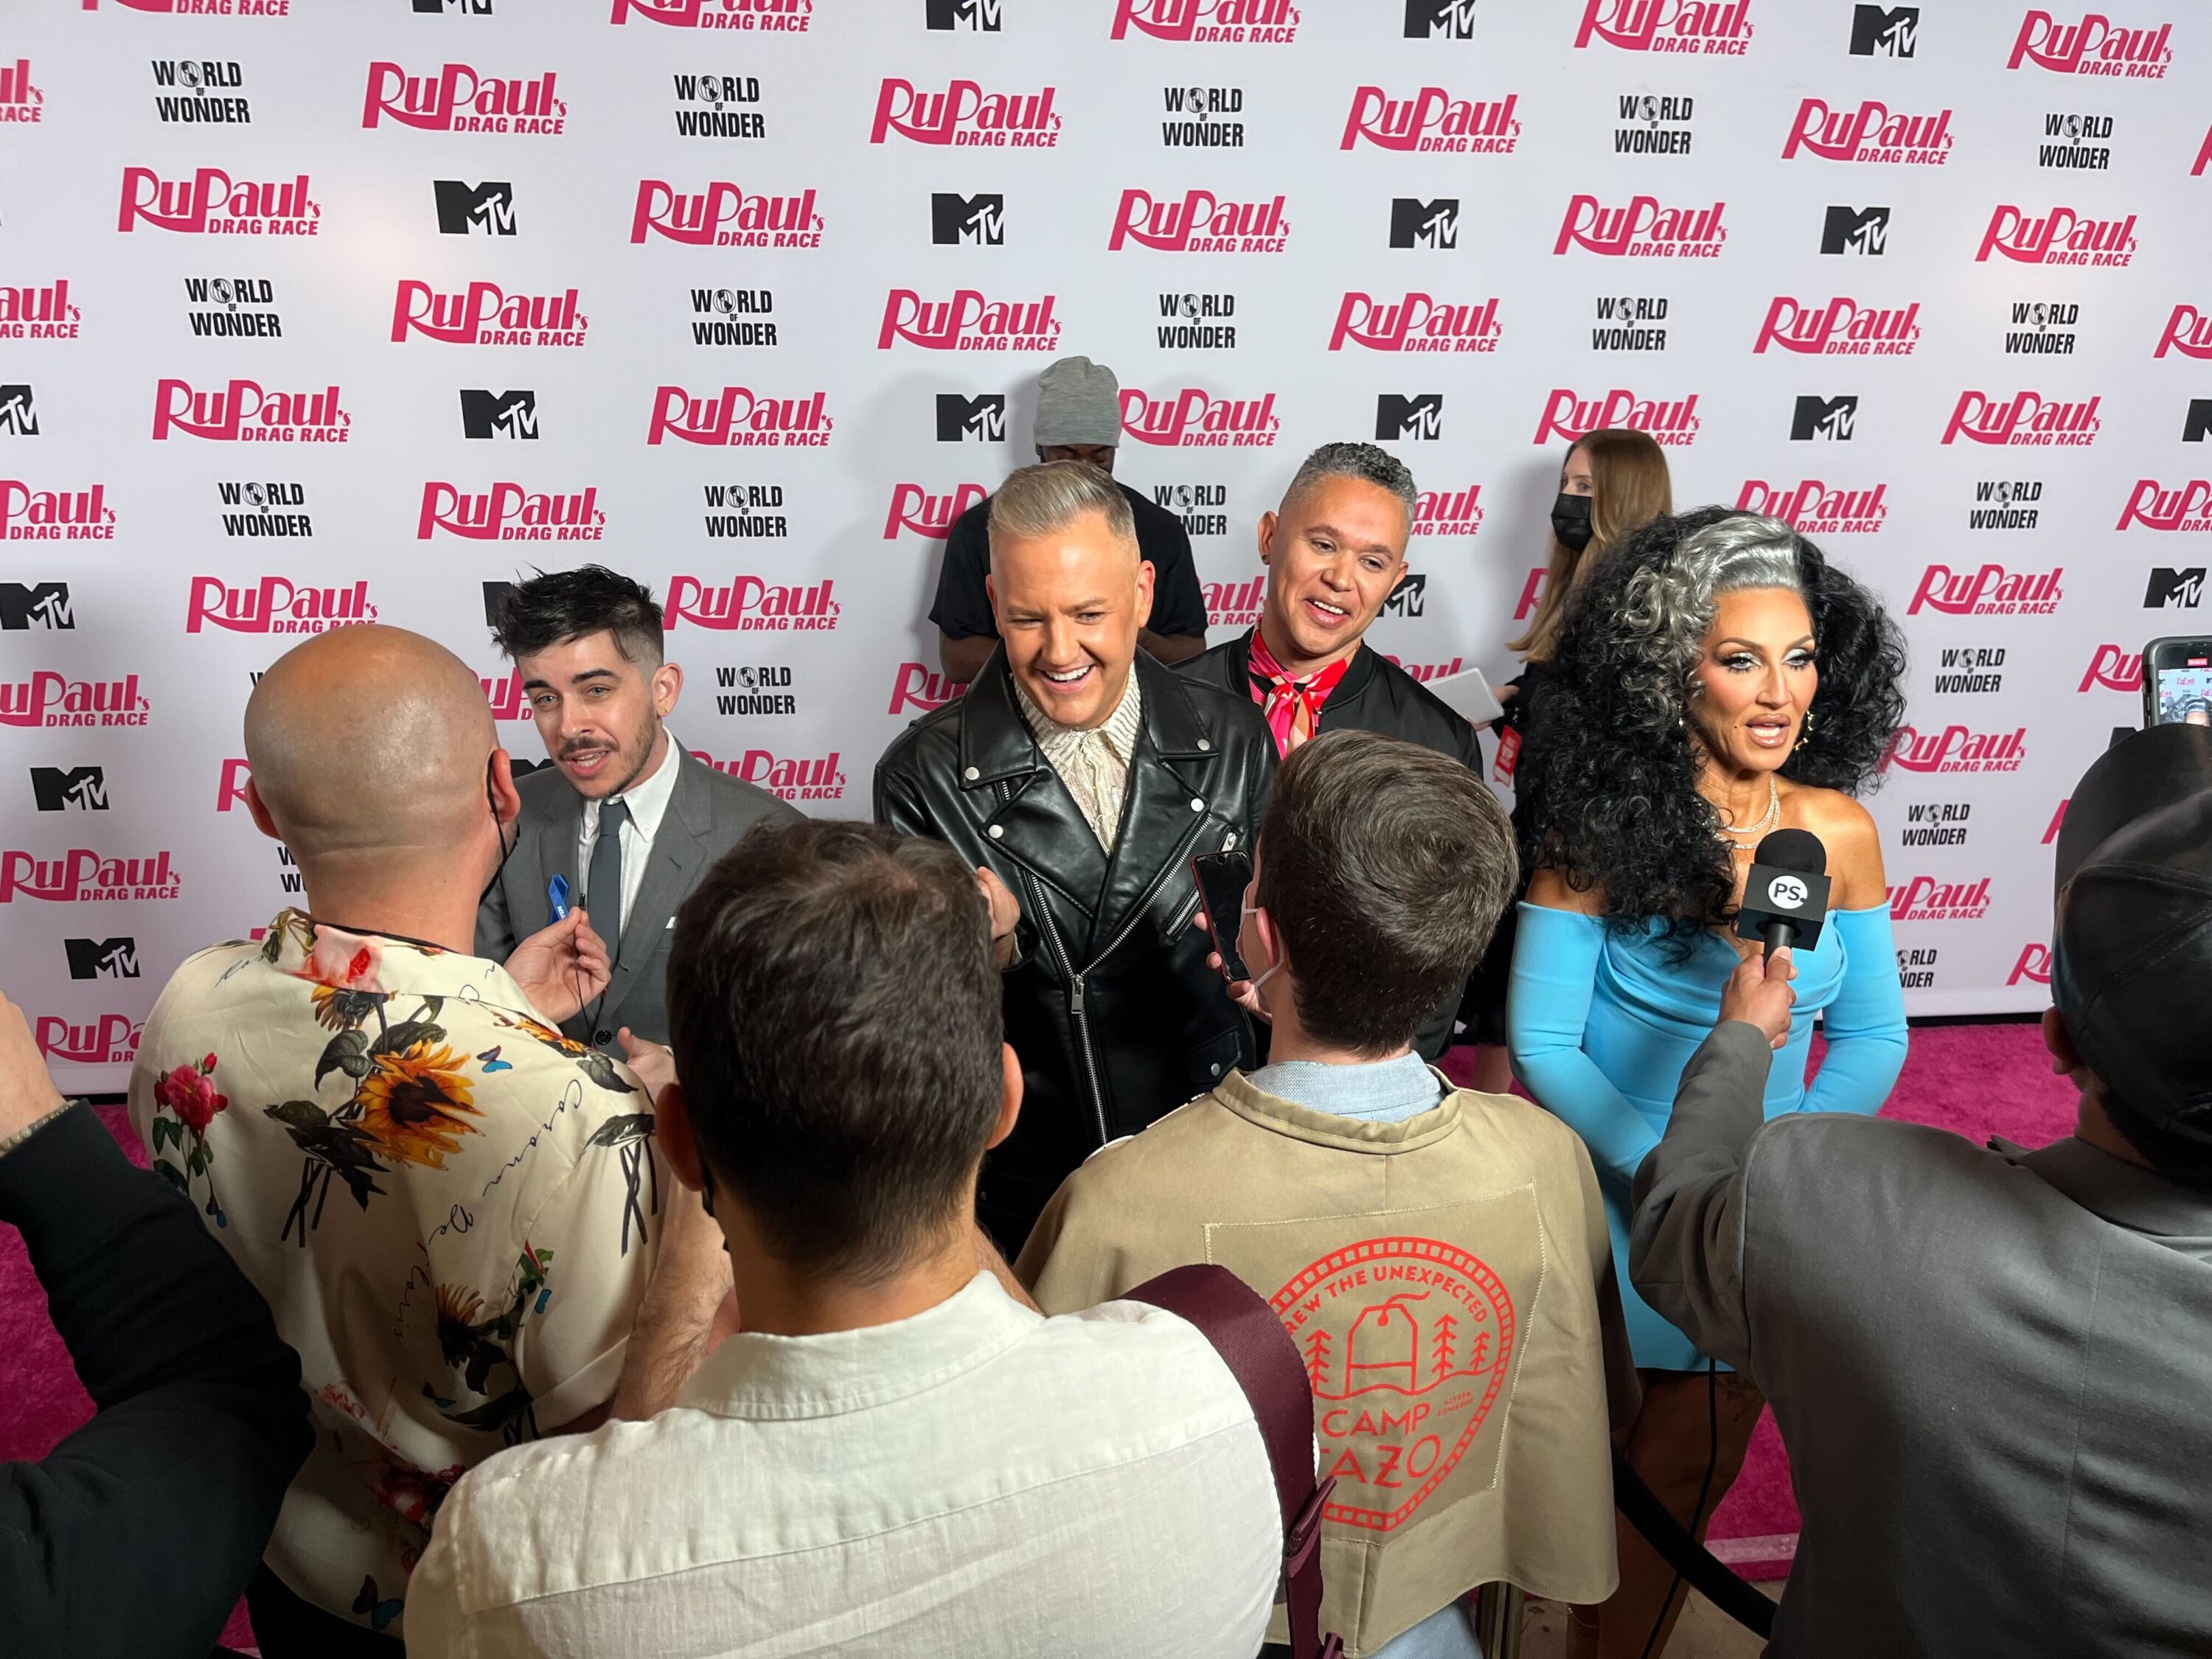 ACLU attorney Chase Strangio, and RuPaul's Drag Race judges Ross Matthews and Michelle Visage being interviewed on the red carpet for the season 15 finale.